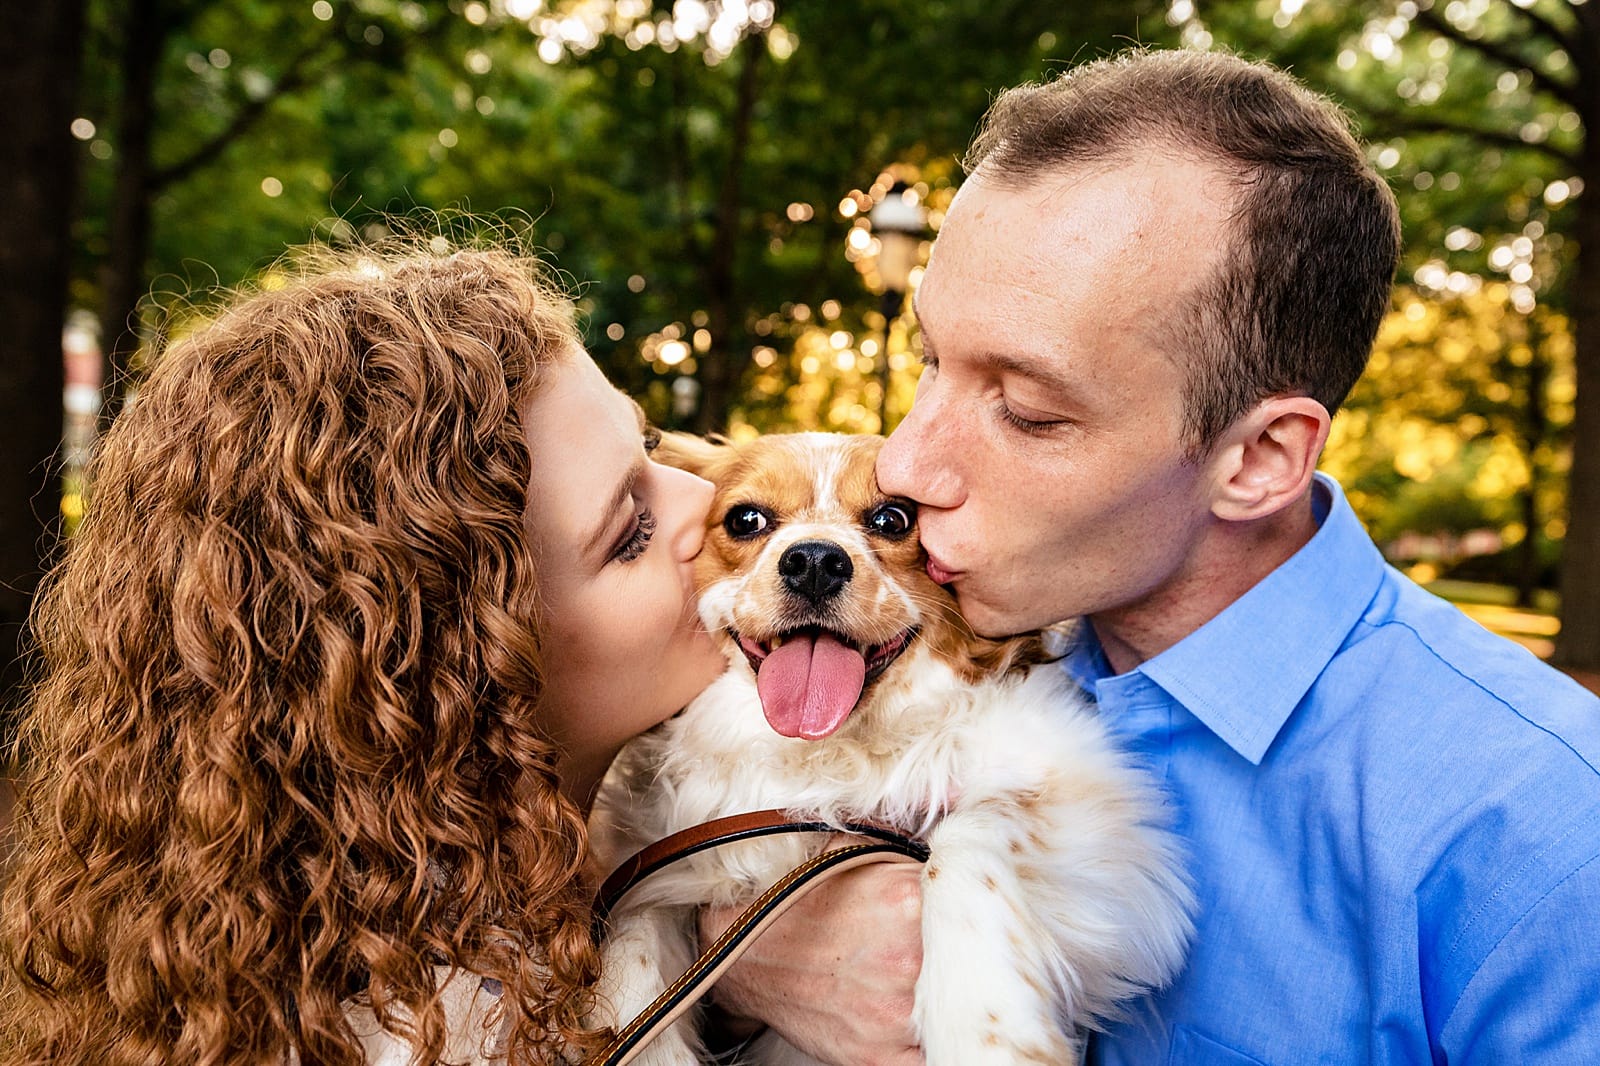 man and woman hold a dog between them and kiss its cheeks